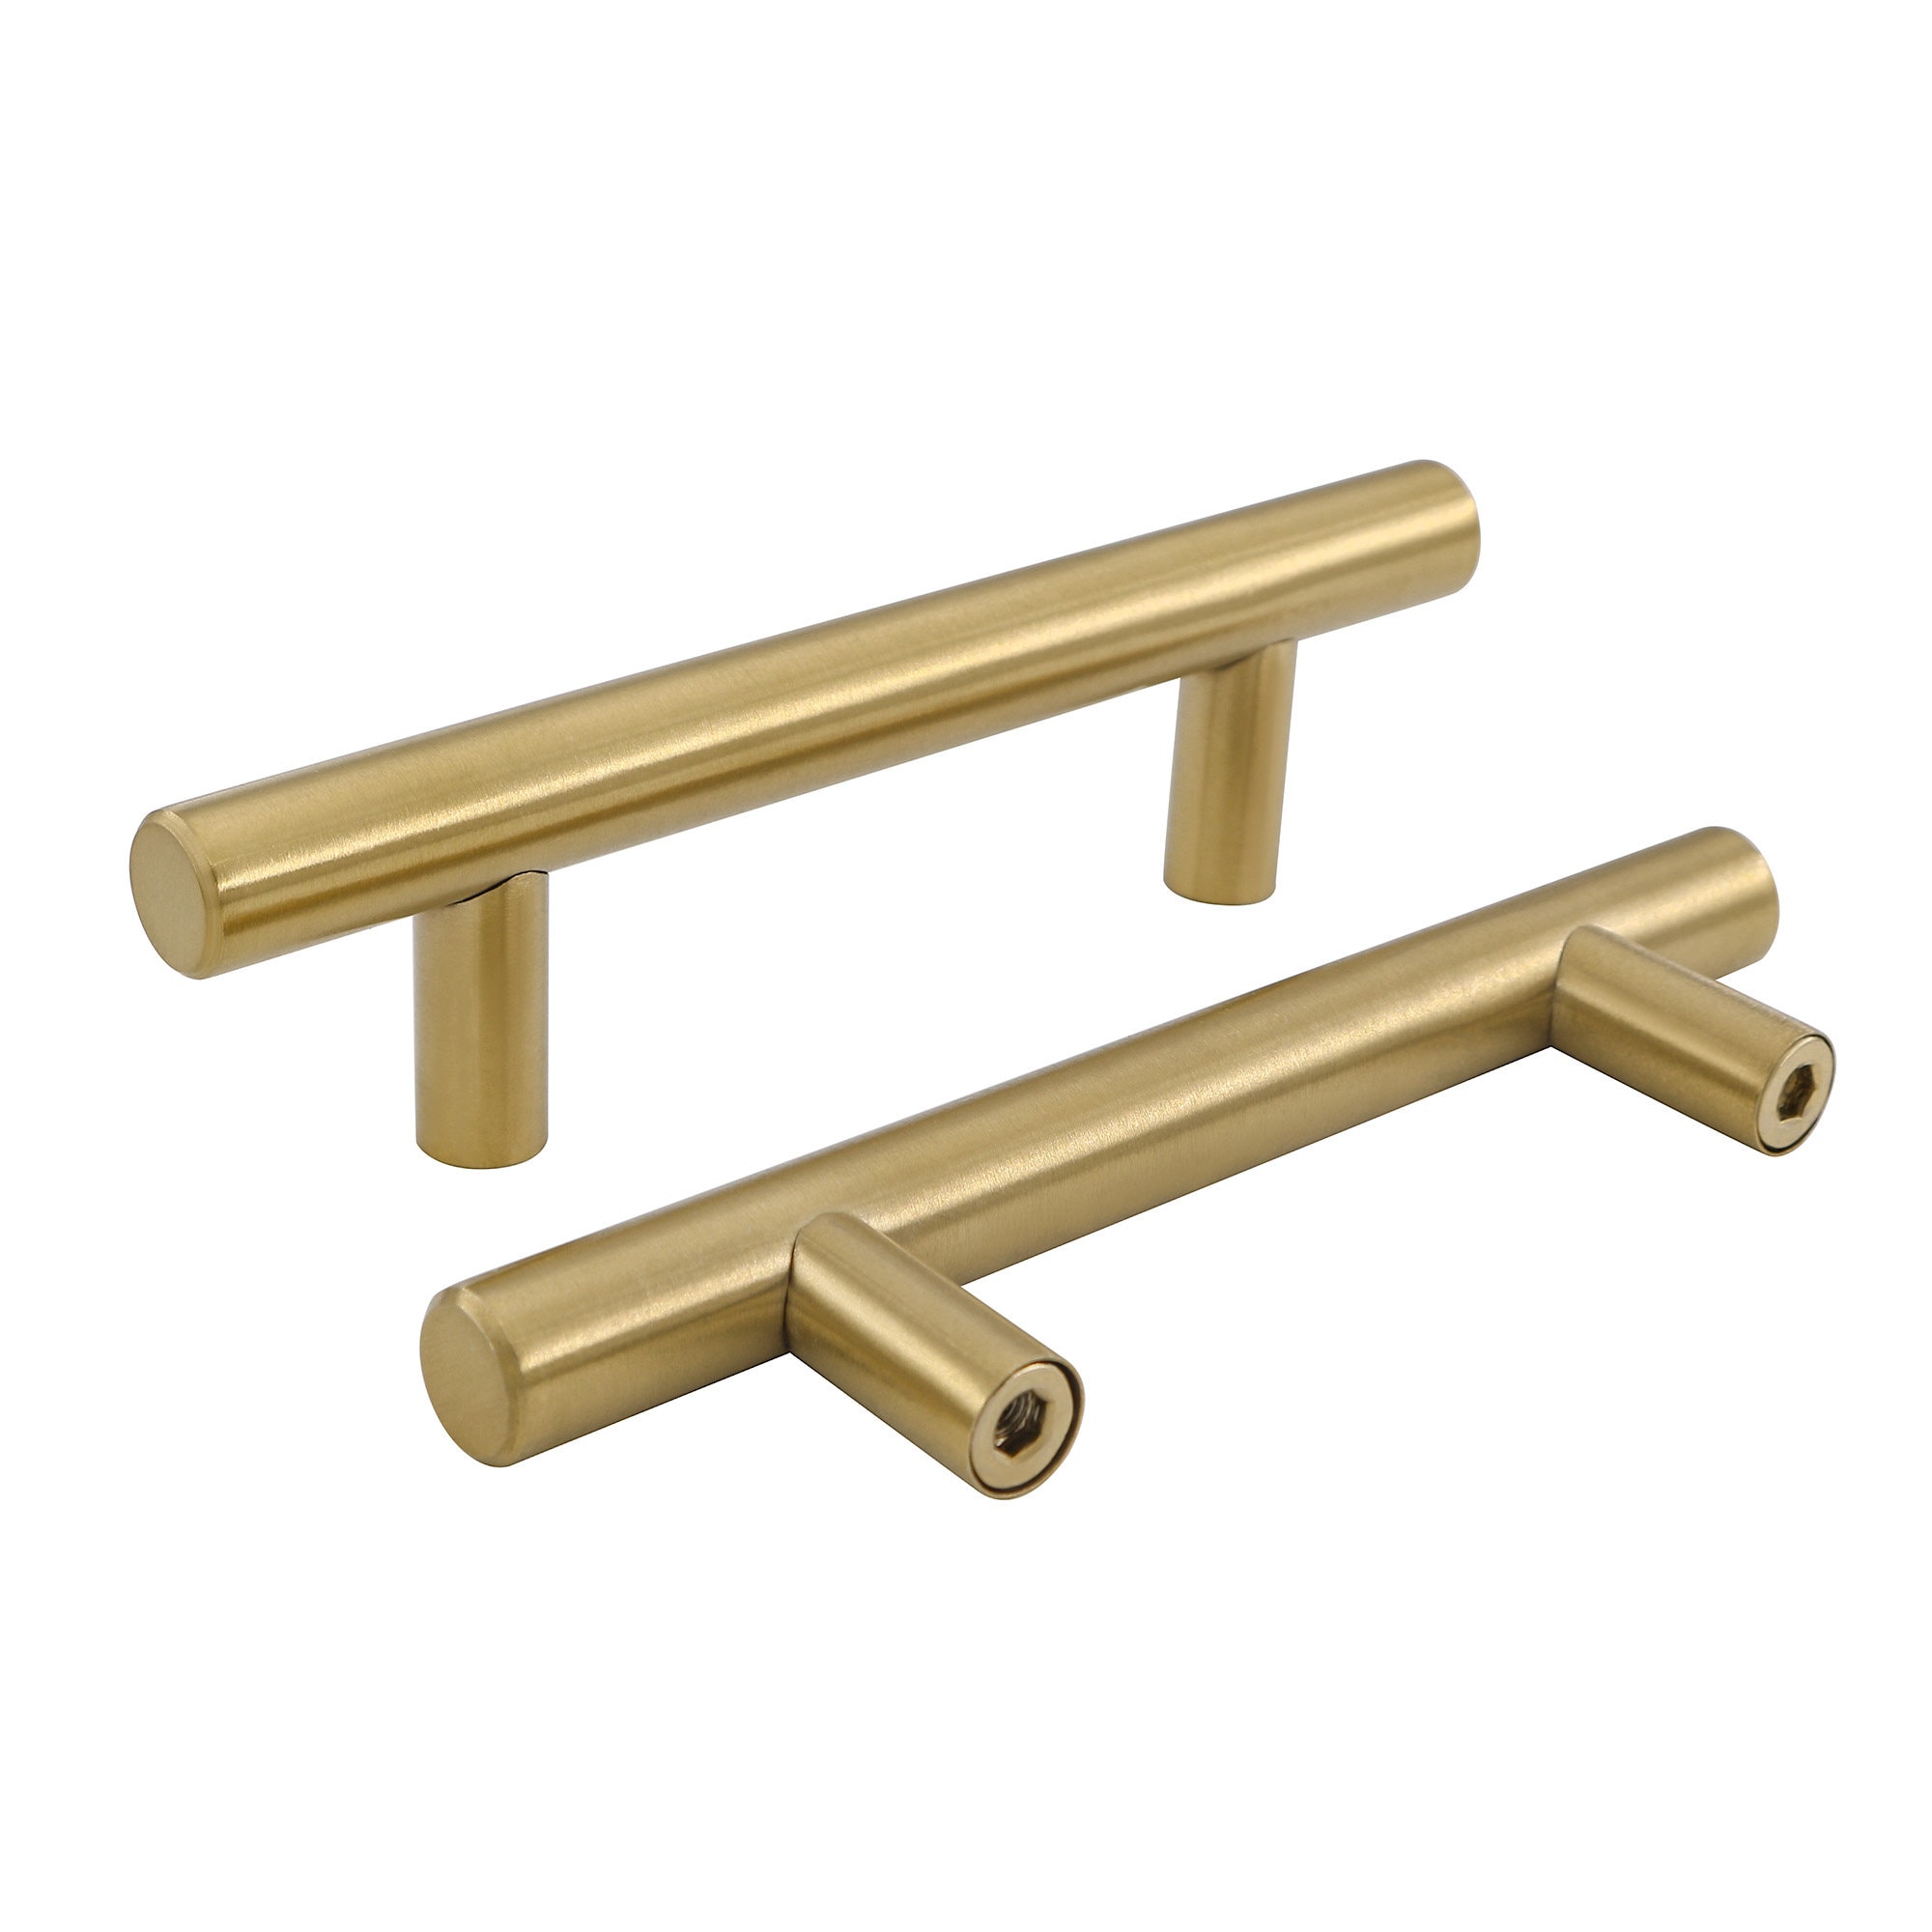 3 Inch Cabinet Pulls Brushed Brass, Brass Cabinet Pulls 3 Inch